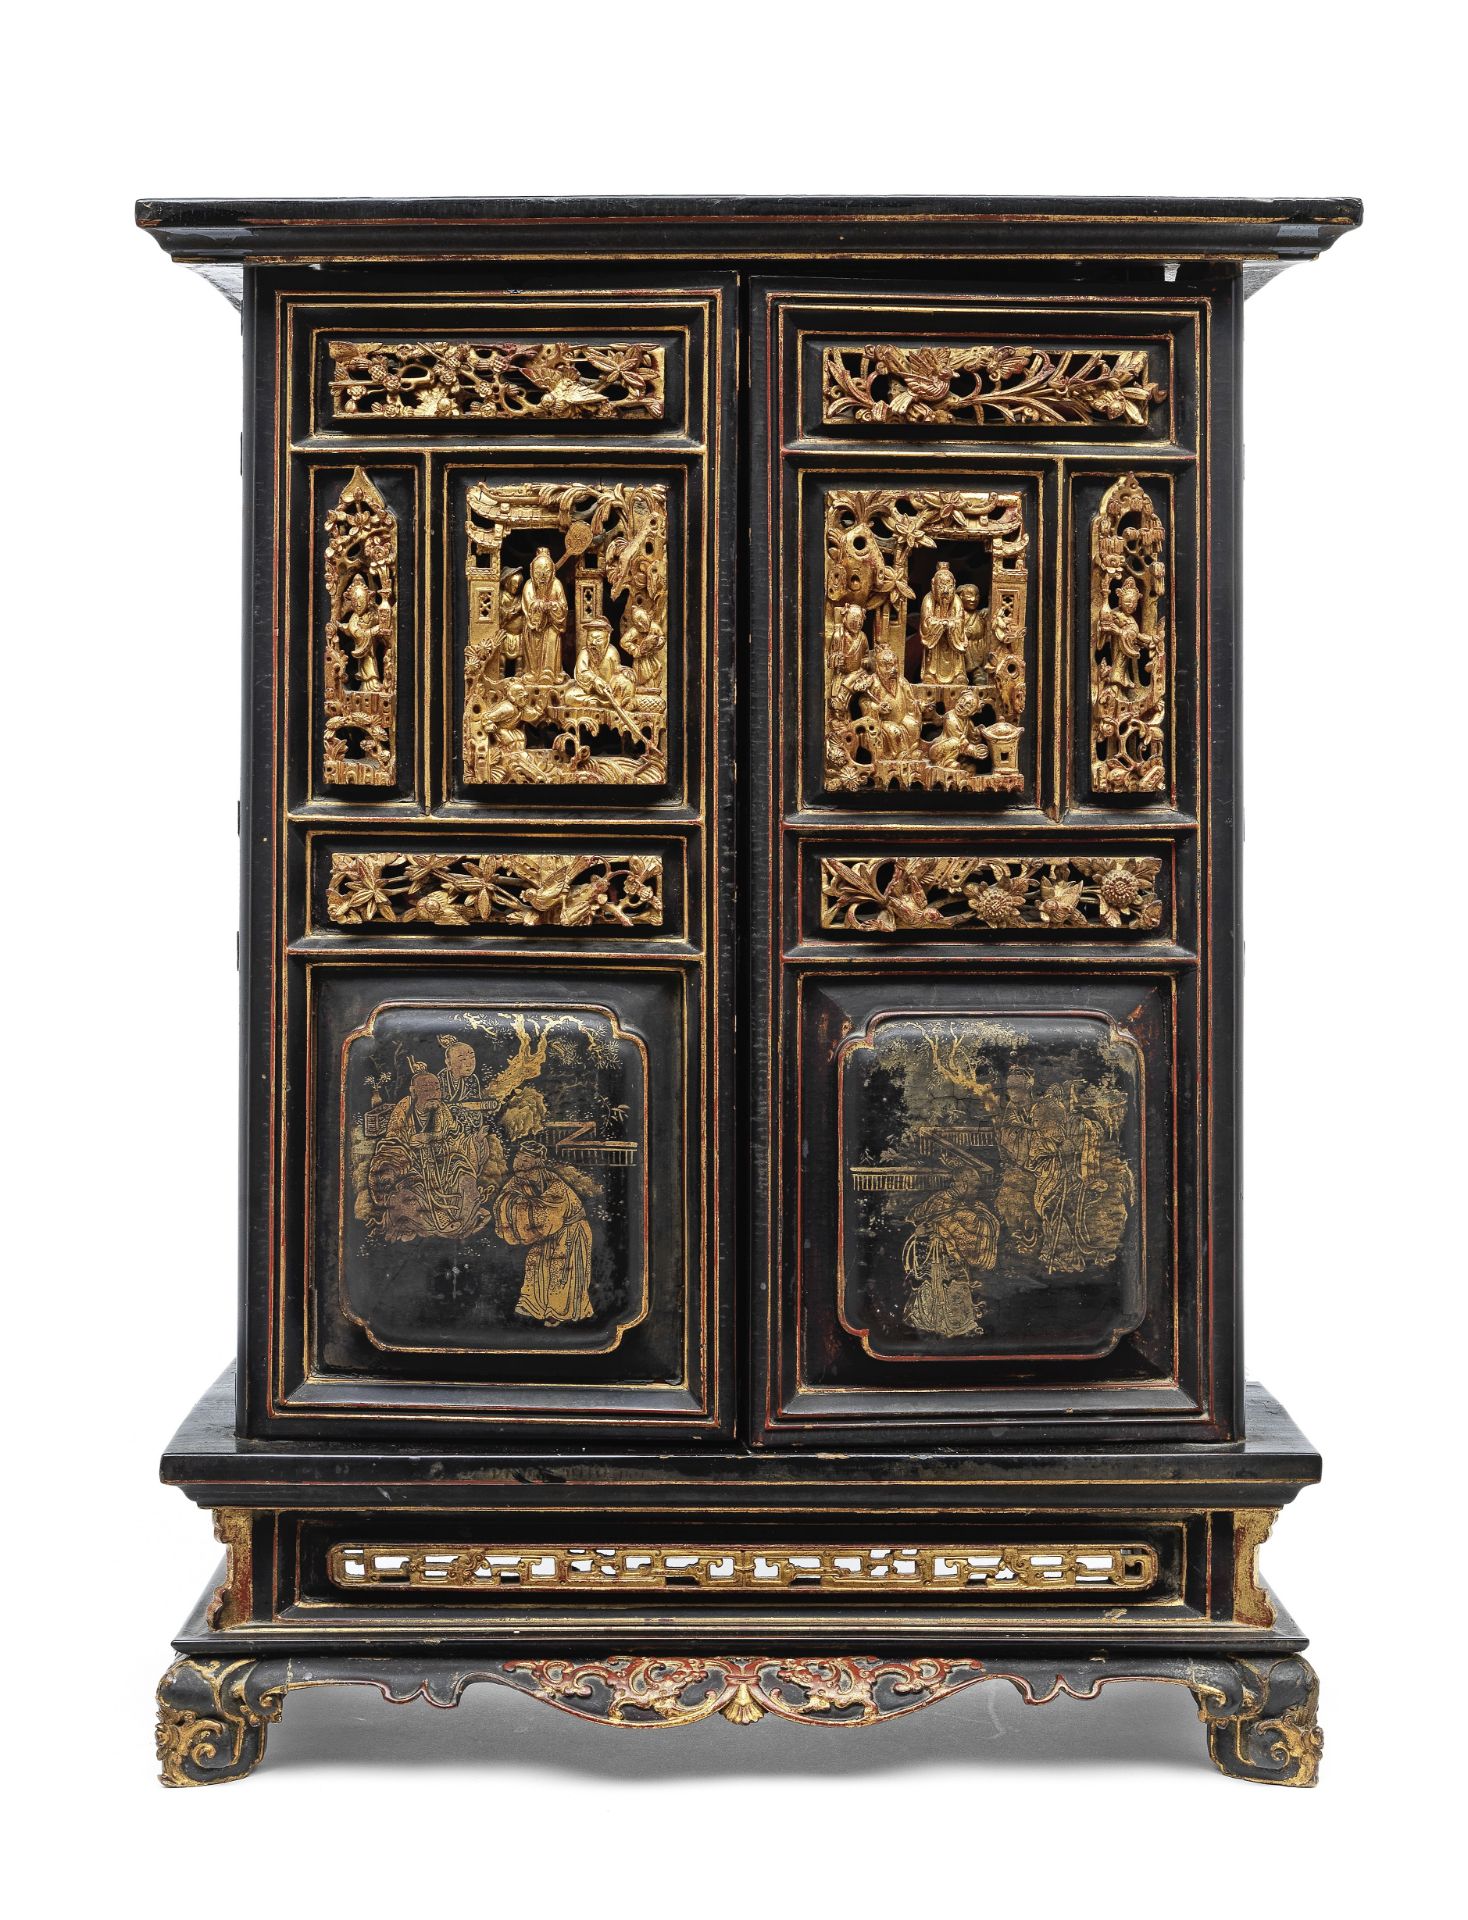 A Chinese gold and black lacquered two-door rectangular cabinet Late Qing dynasty